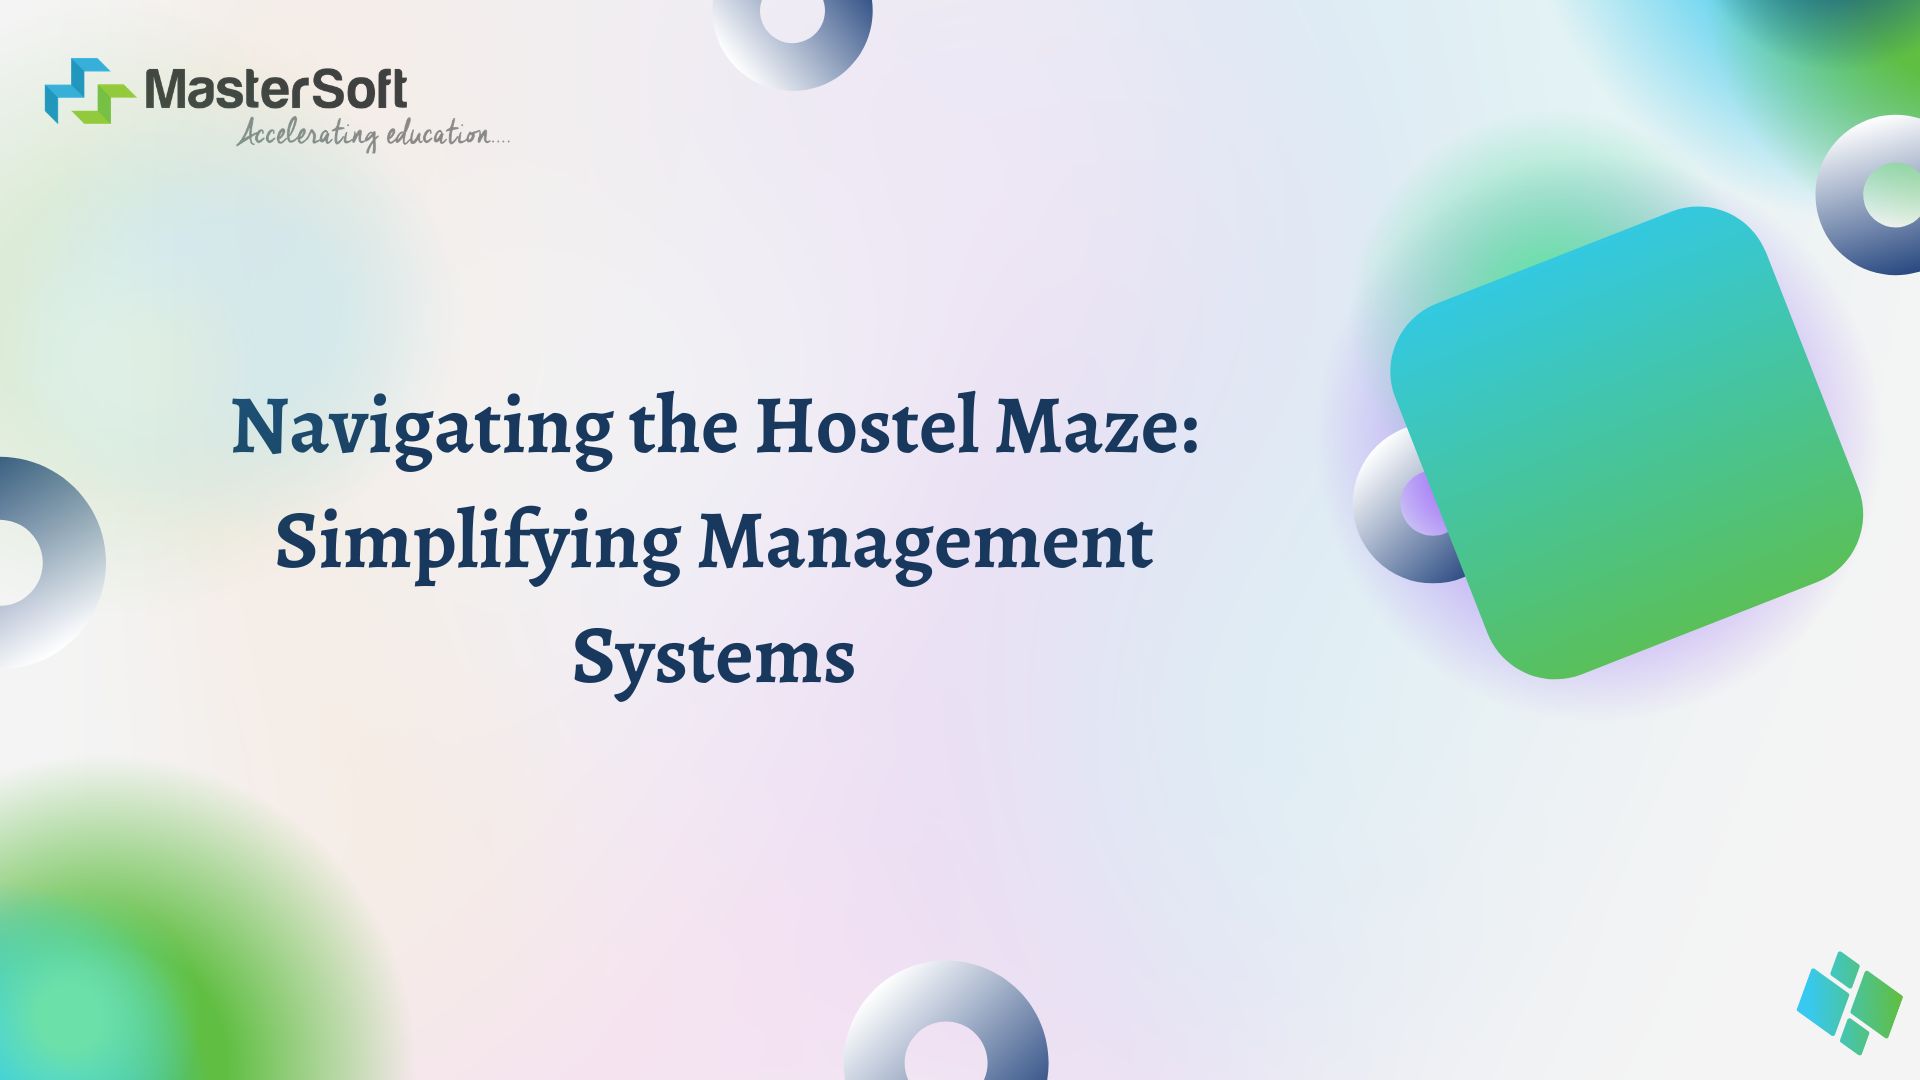 Navigating the Hostel Maze: Simplifying Management Systems